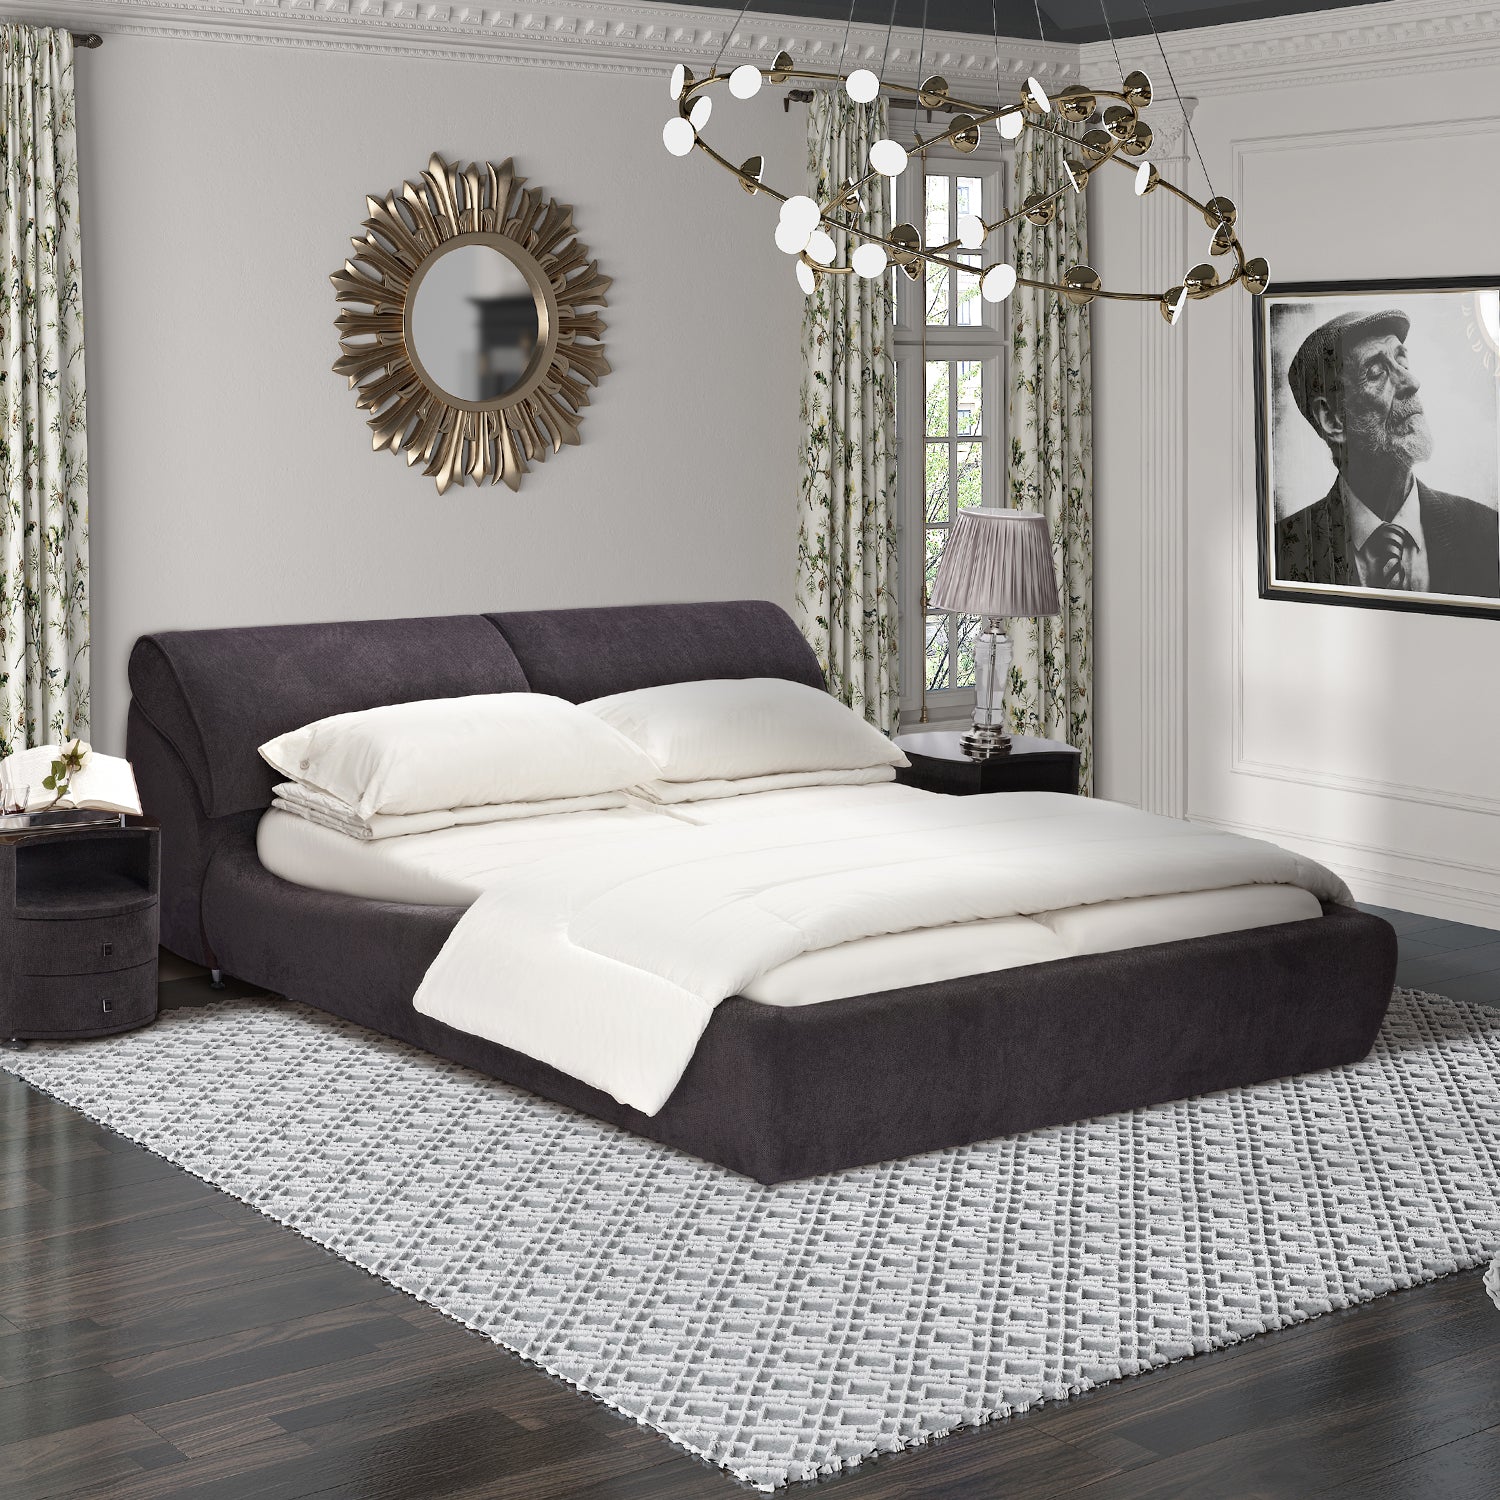 DeRUCCI Bed Frame BZZ4 - 117 in a modern bedroom with dark fabric upholstery, white bedding, gold-framed mirror, patterned rug, curtains, stylish chandelier, and framed art.